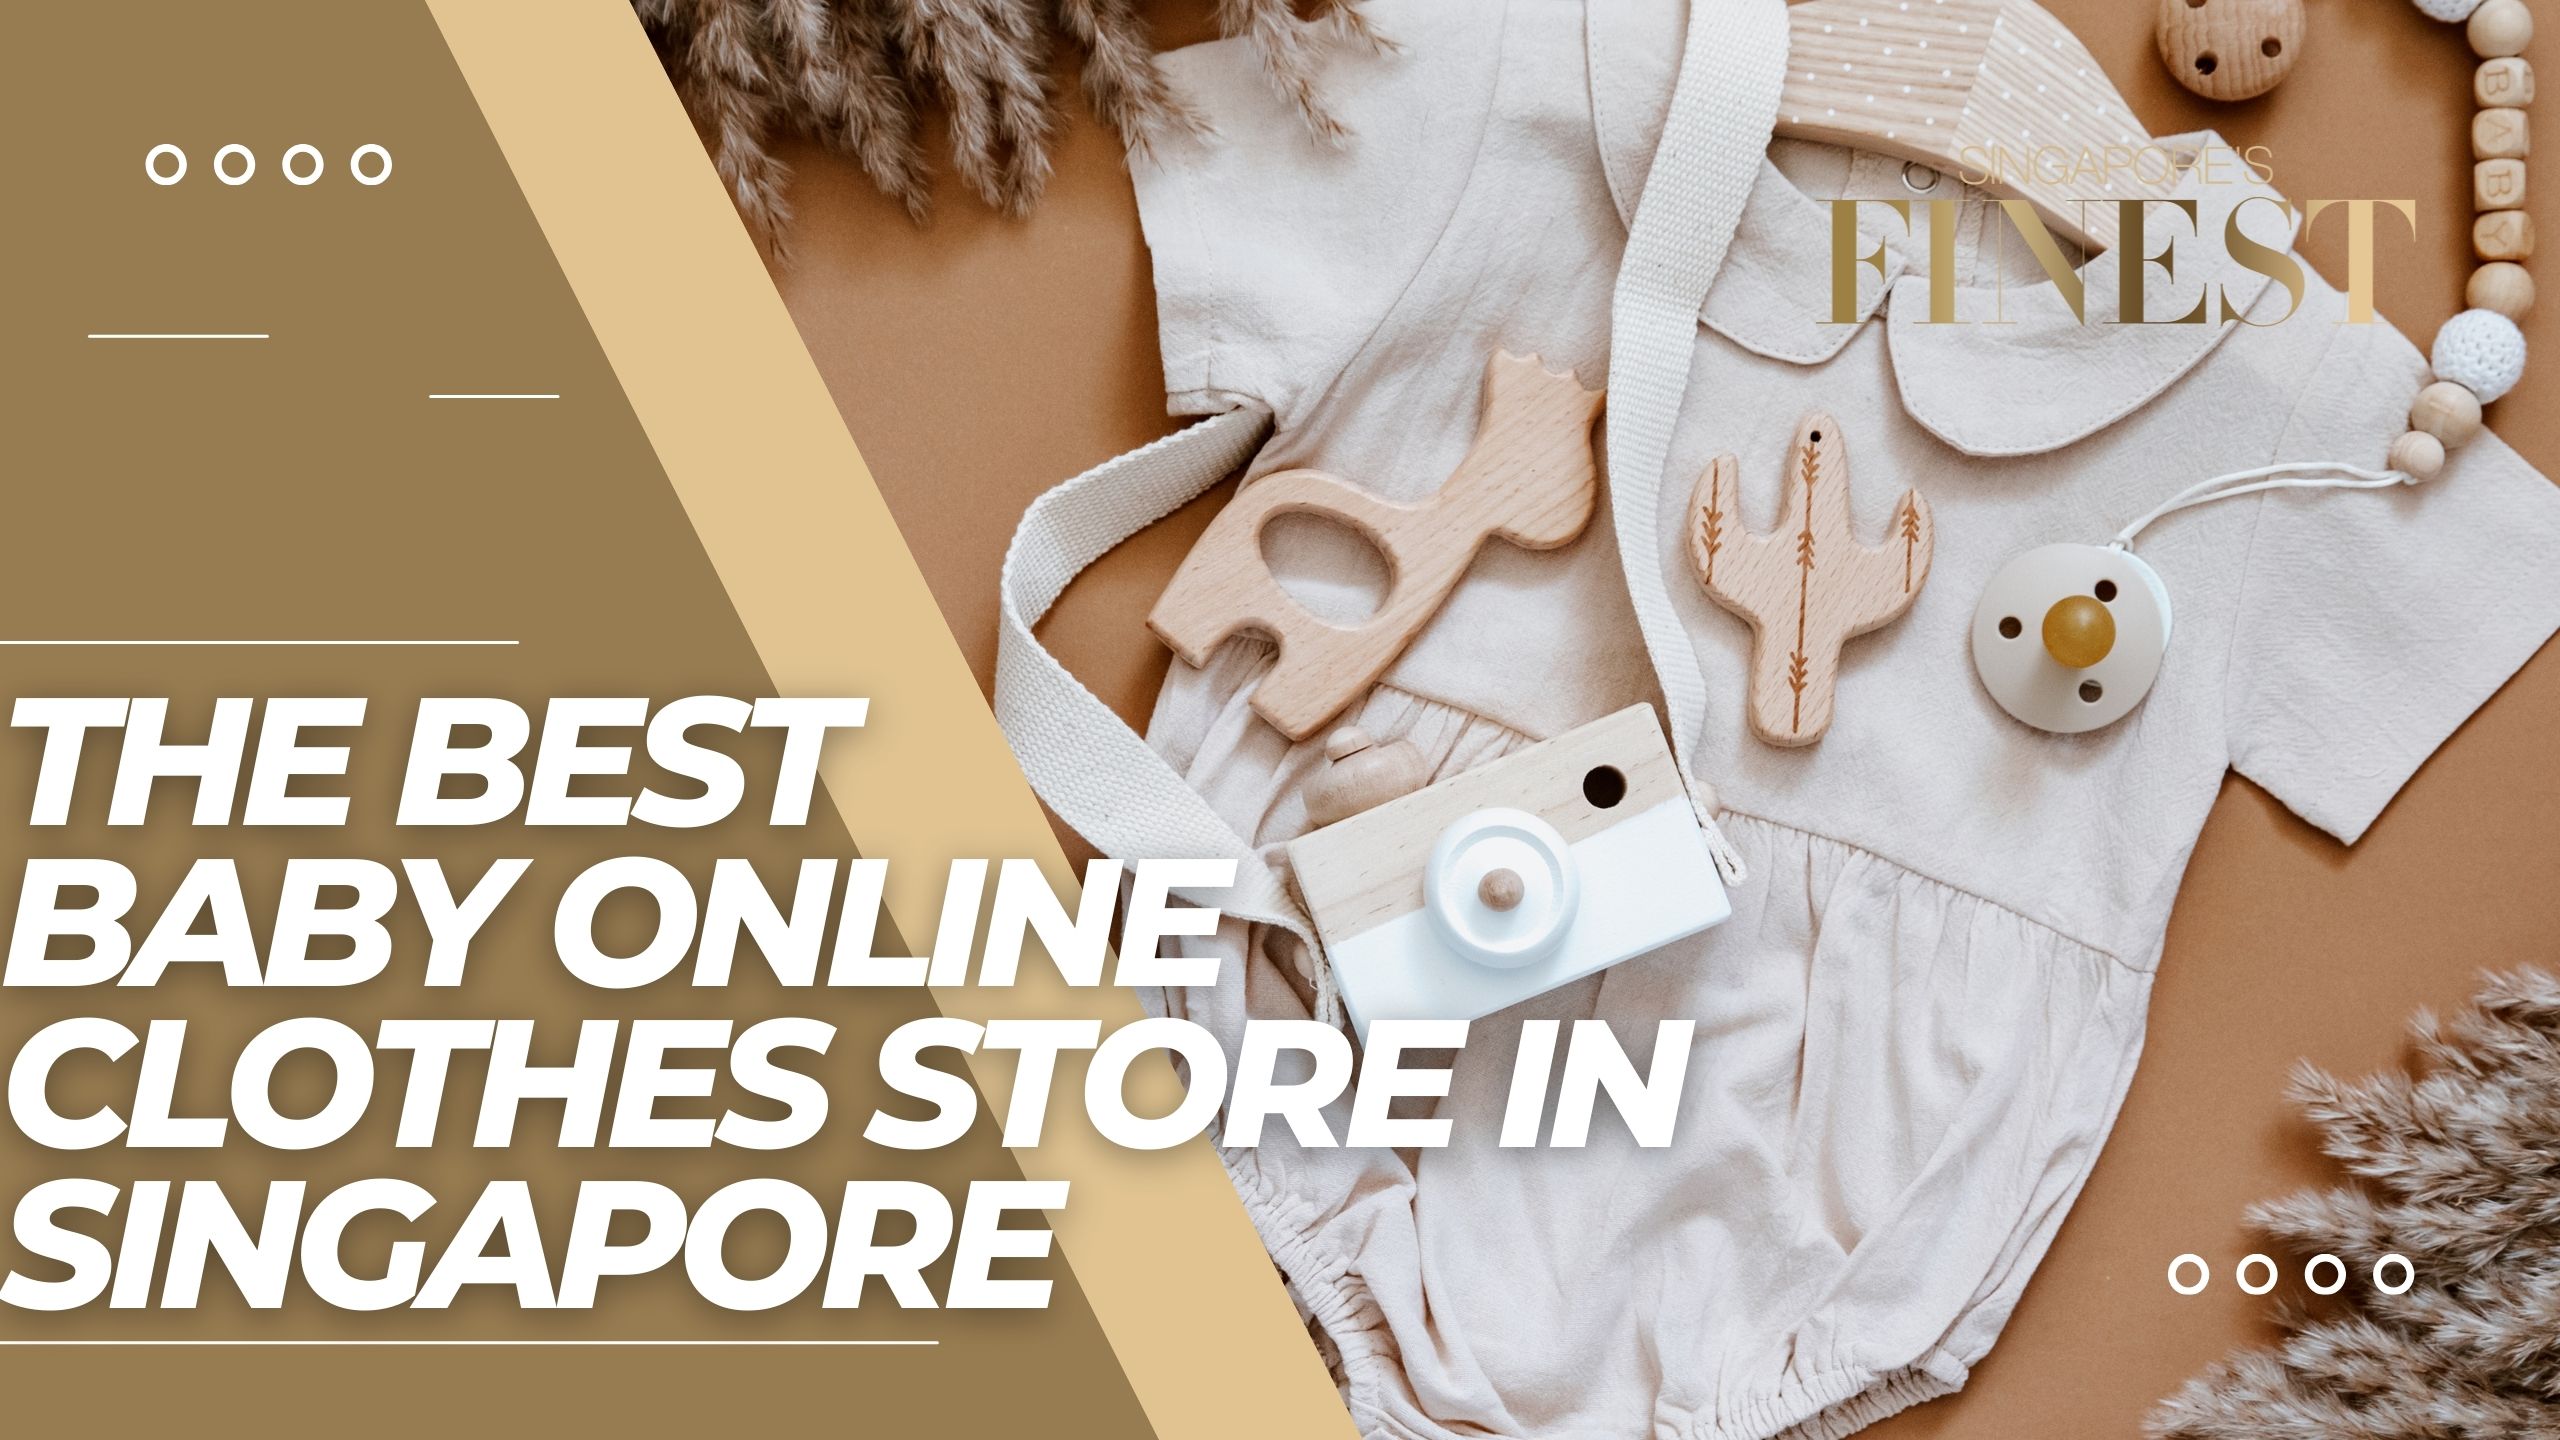 The Finest Baby Online Clothes Store in Singapore